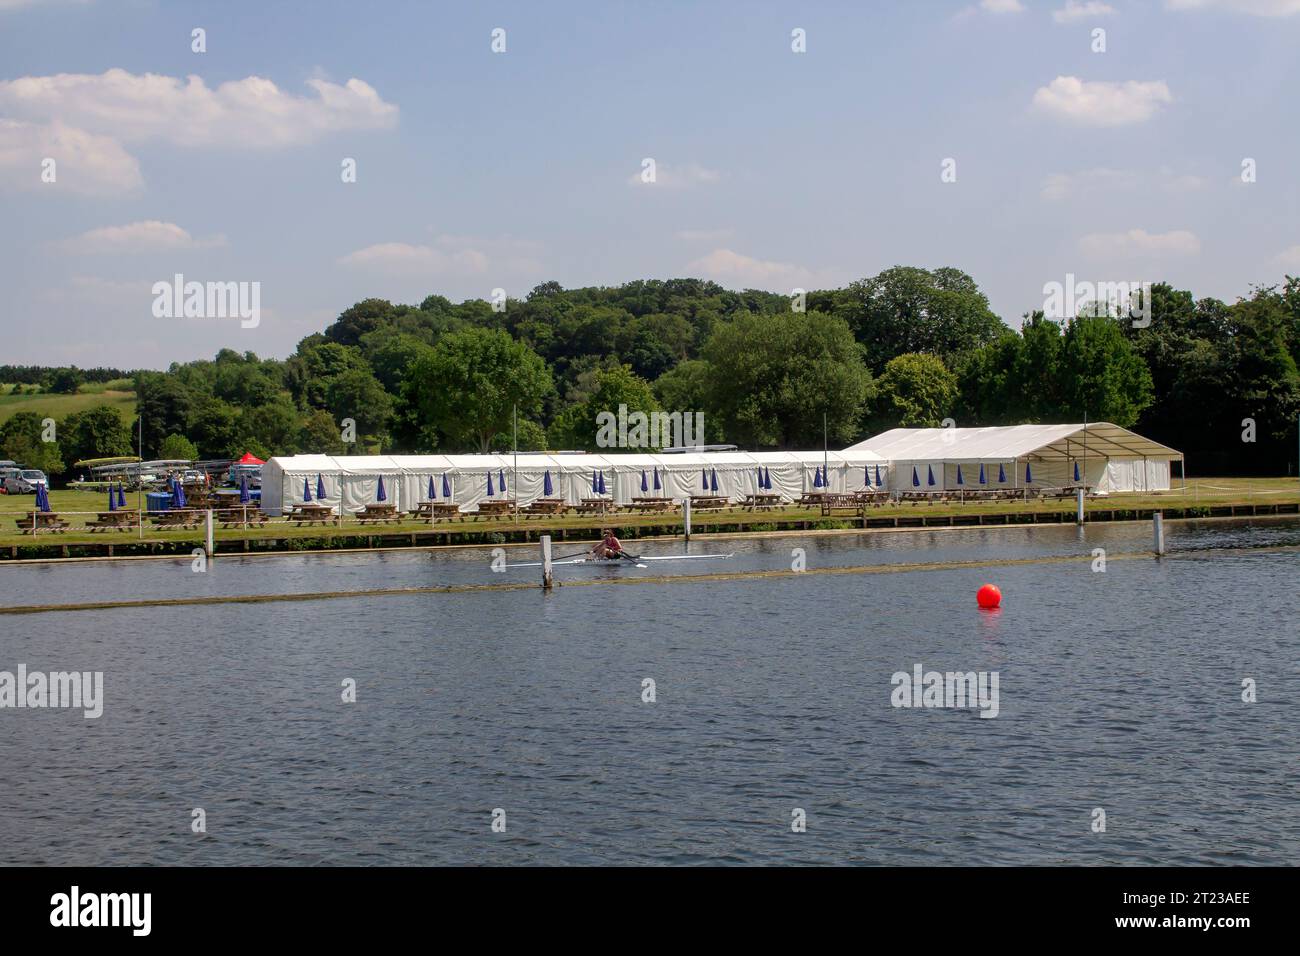 14 June 23 Marquees and tents on the bank of the Thames at Henley-on-Thames in Oxfordshire, in preparation for the Royal Regatta, on a fine summer aft Stock Photo